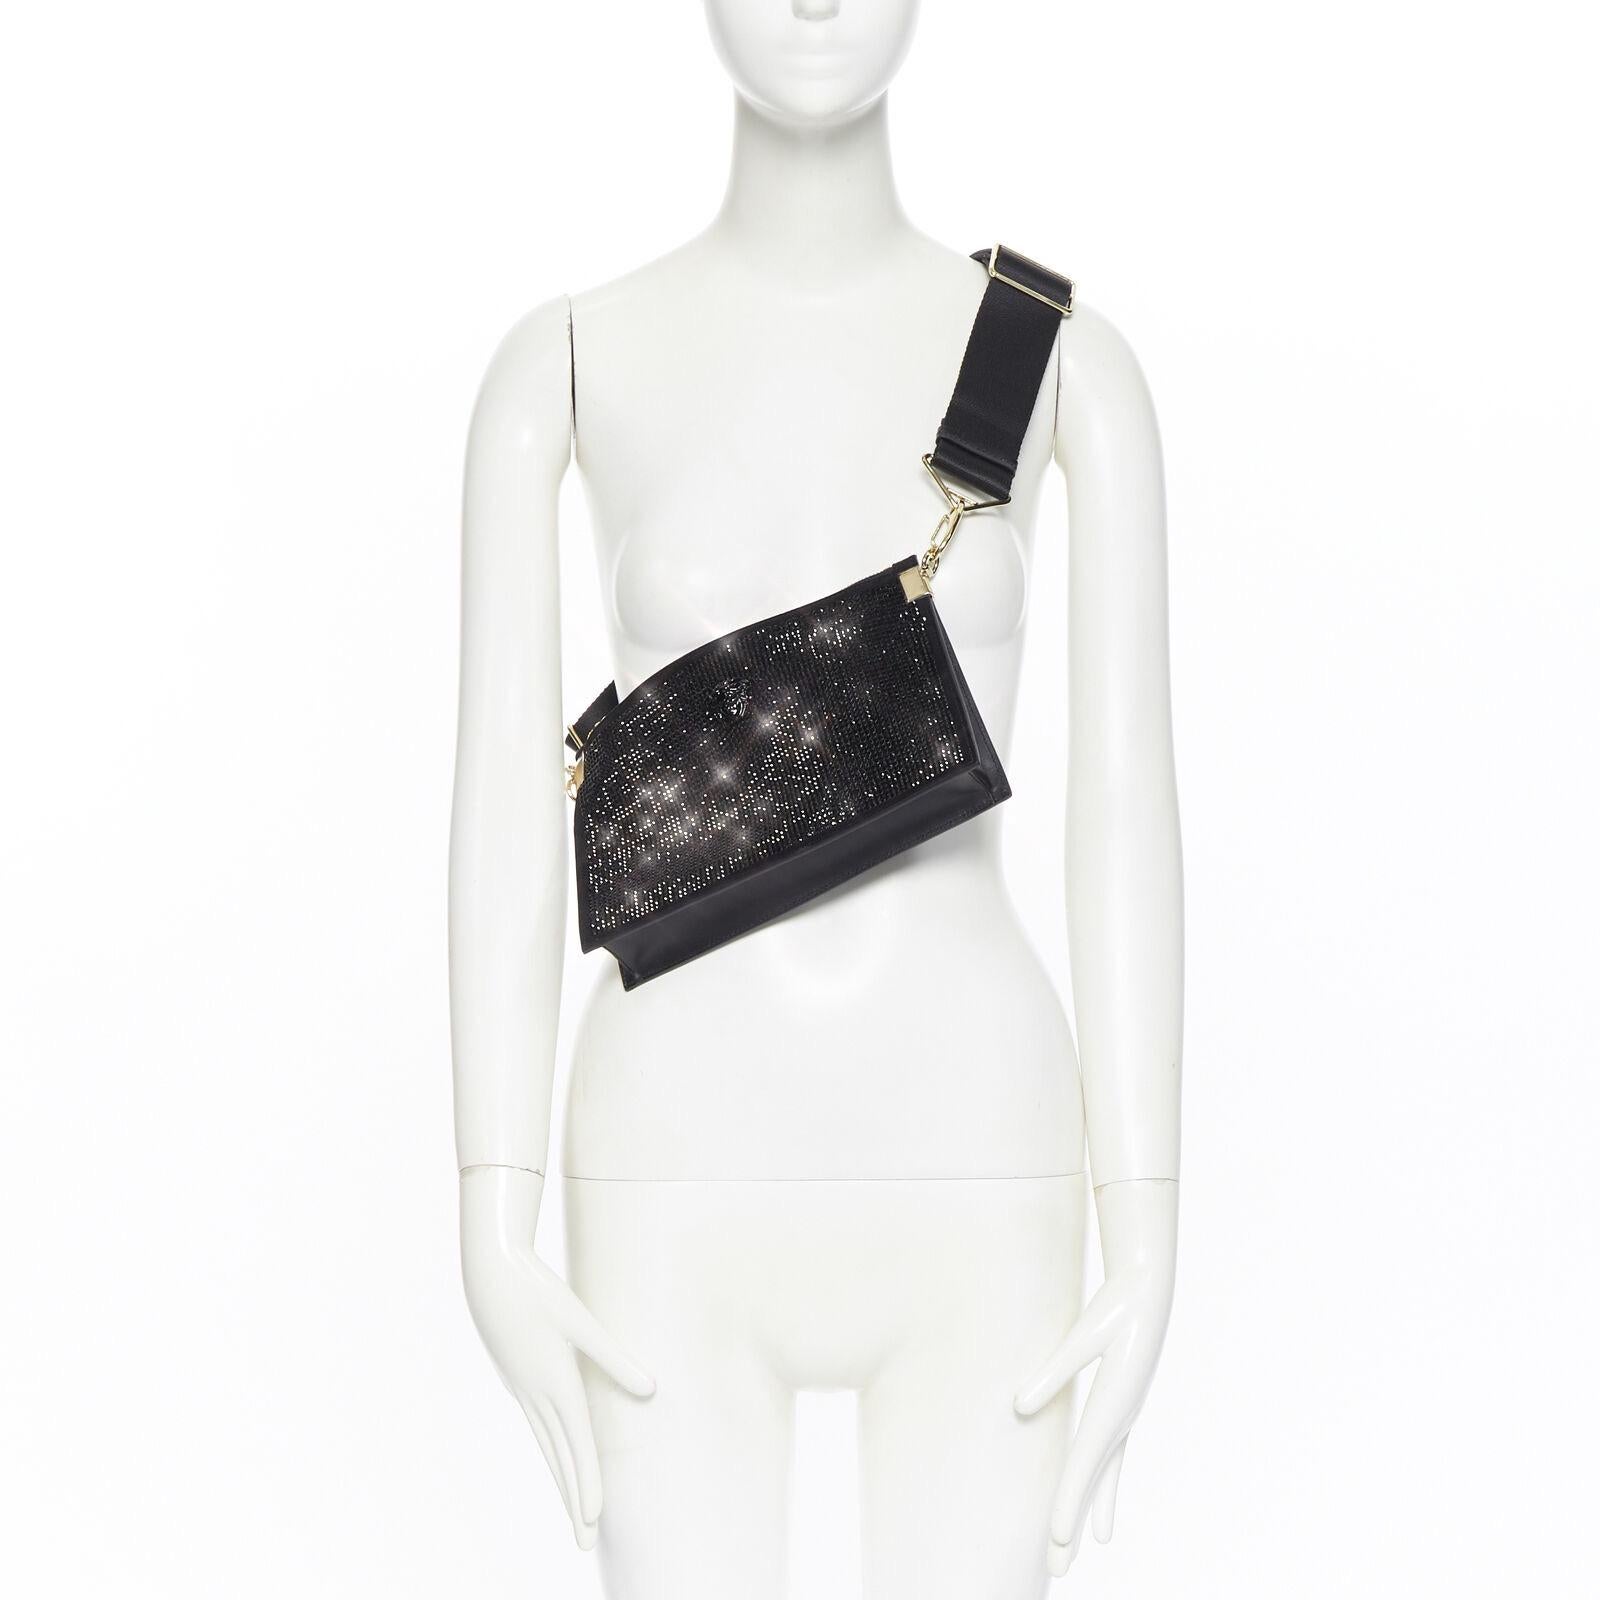 new VERSACE Palazzo Medusa black crystal strass goat clutch crossbody bag 
Reference: TGAS/A04204 
Brand: Versace 
Designer: Donatella Versace 
Model: Palazzo Medusa crystal 
Collection: 2019 
Material: Leather 
Color: Black 
Pattern: Solid